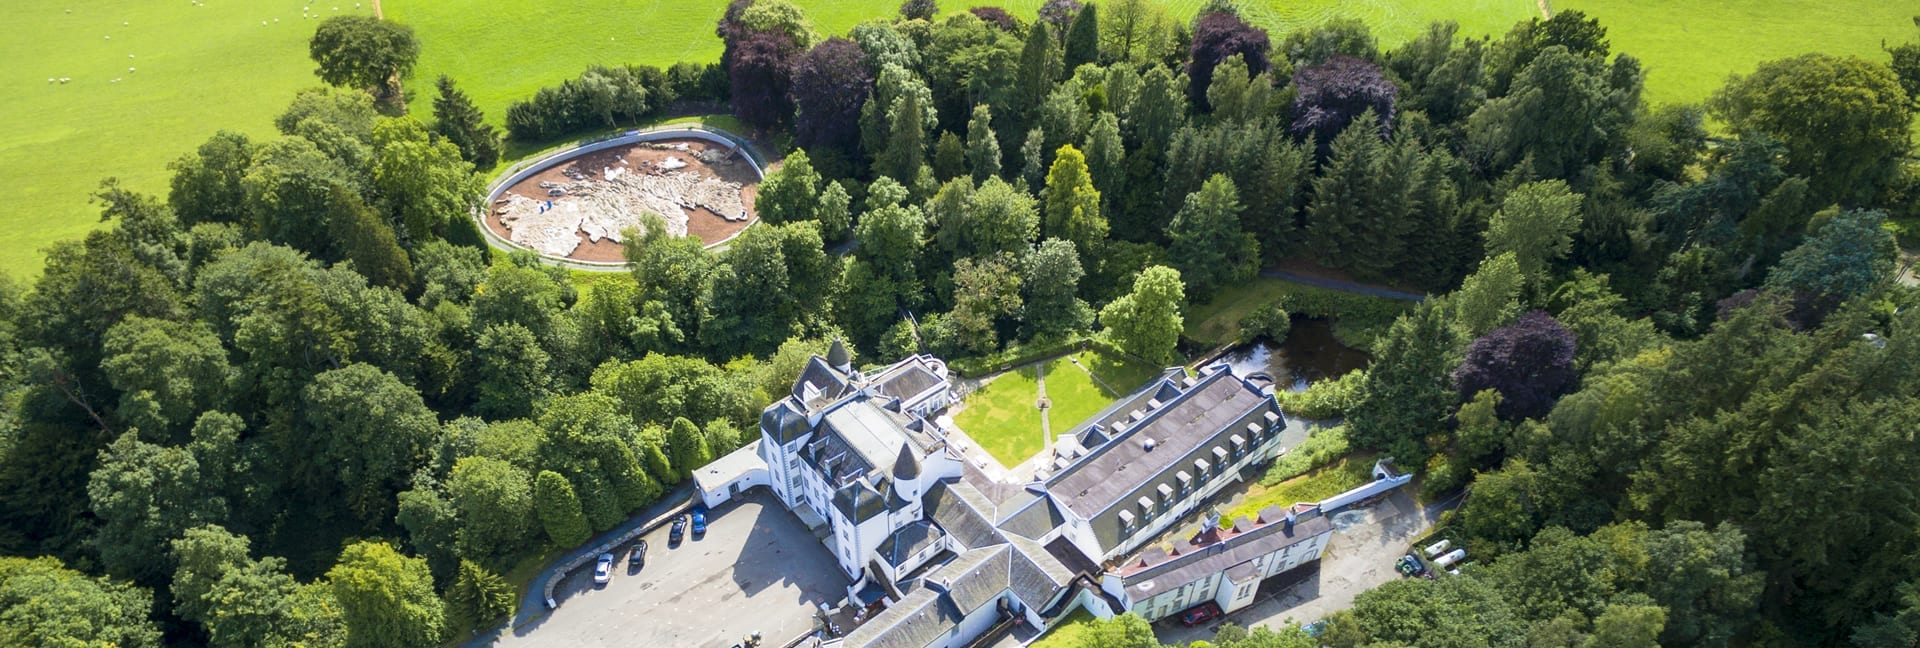 An aerial view of Barony Castle